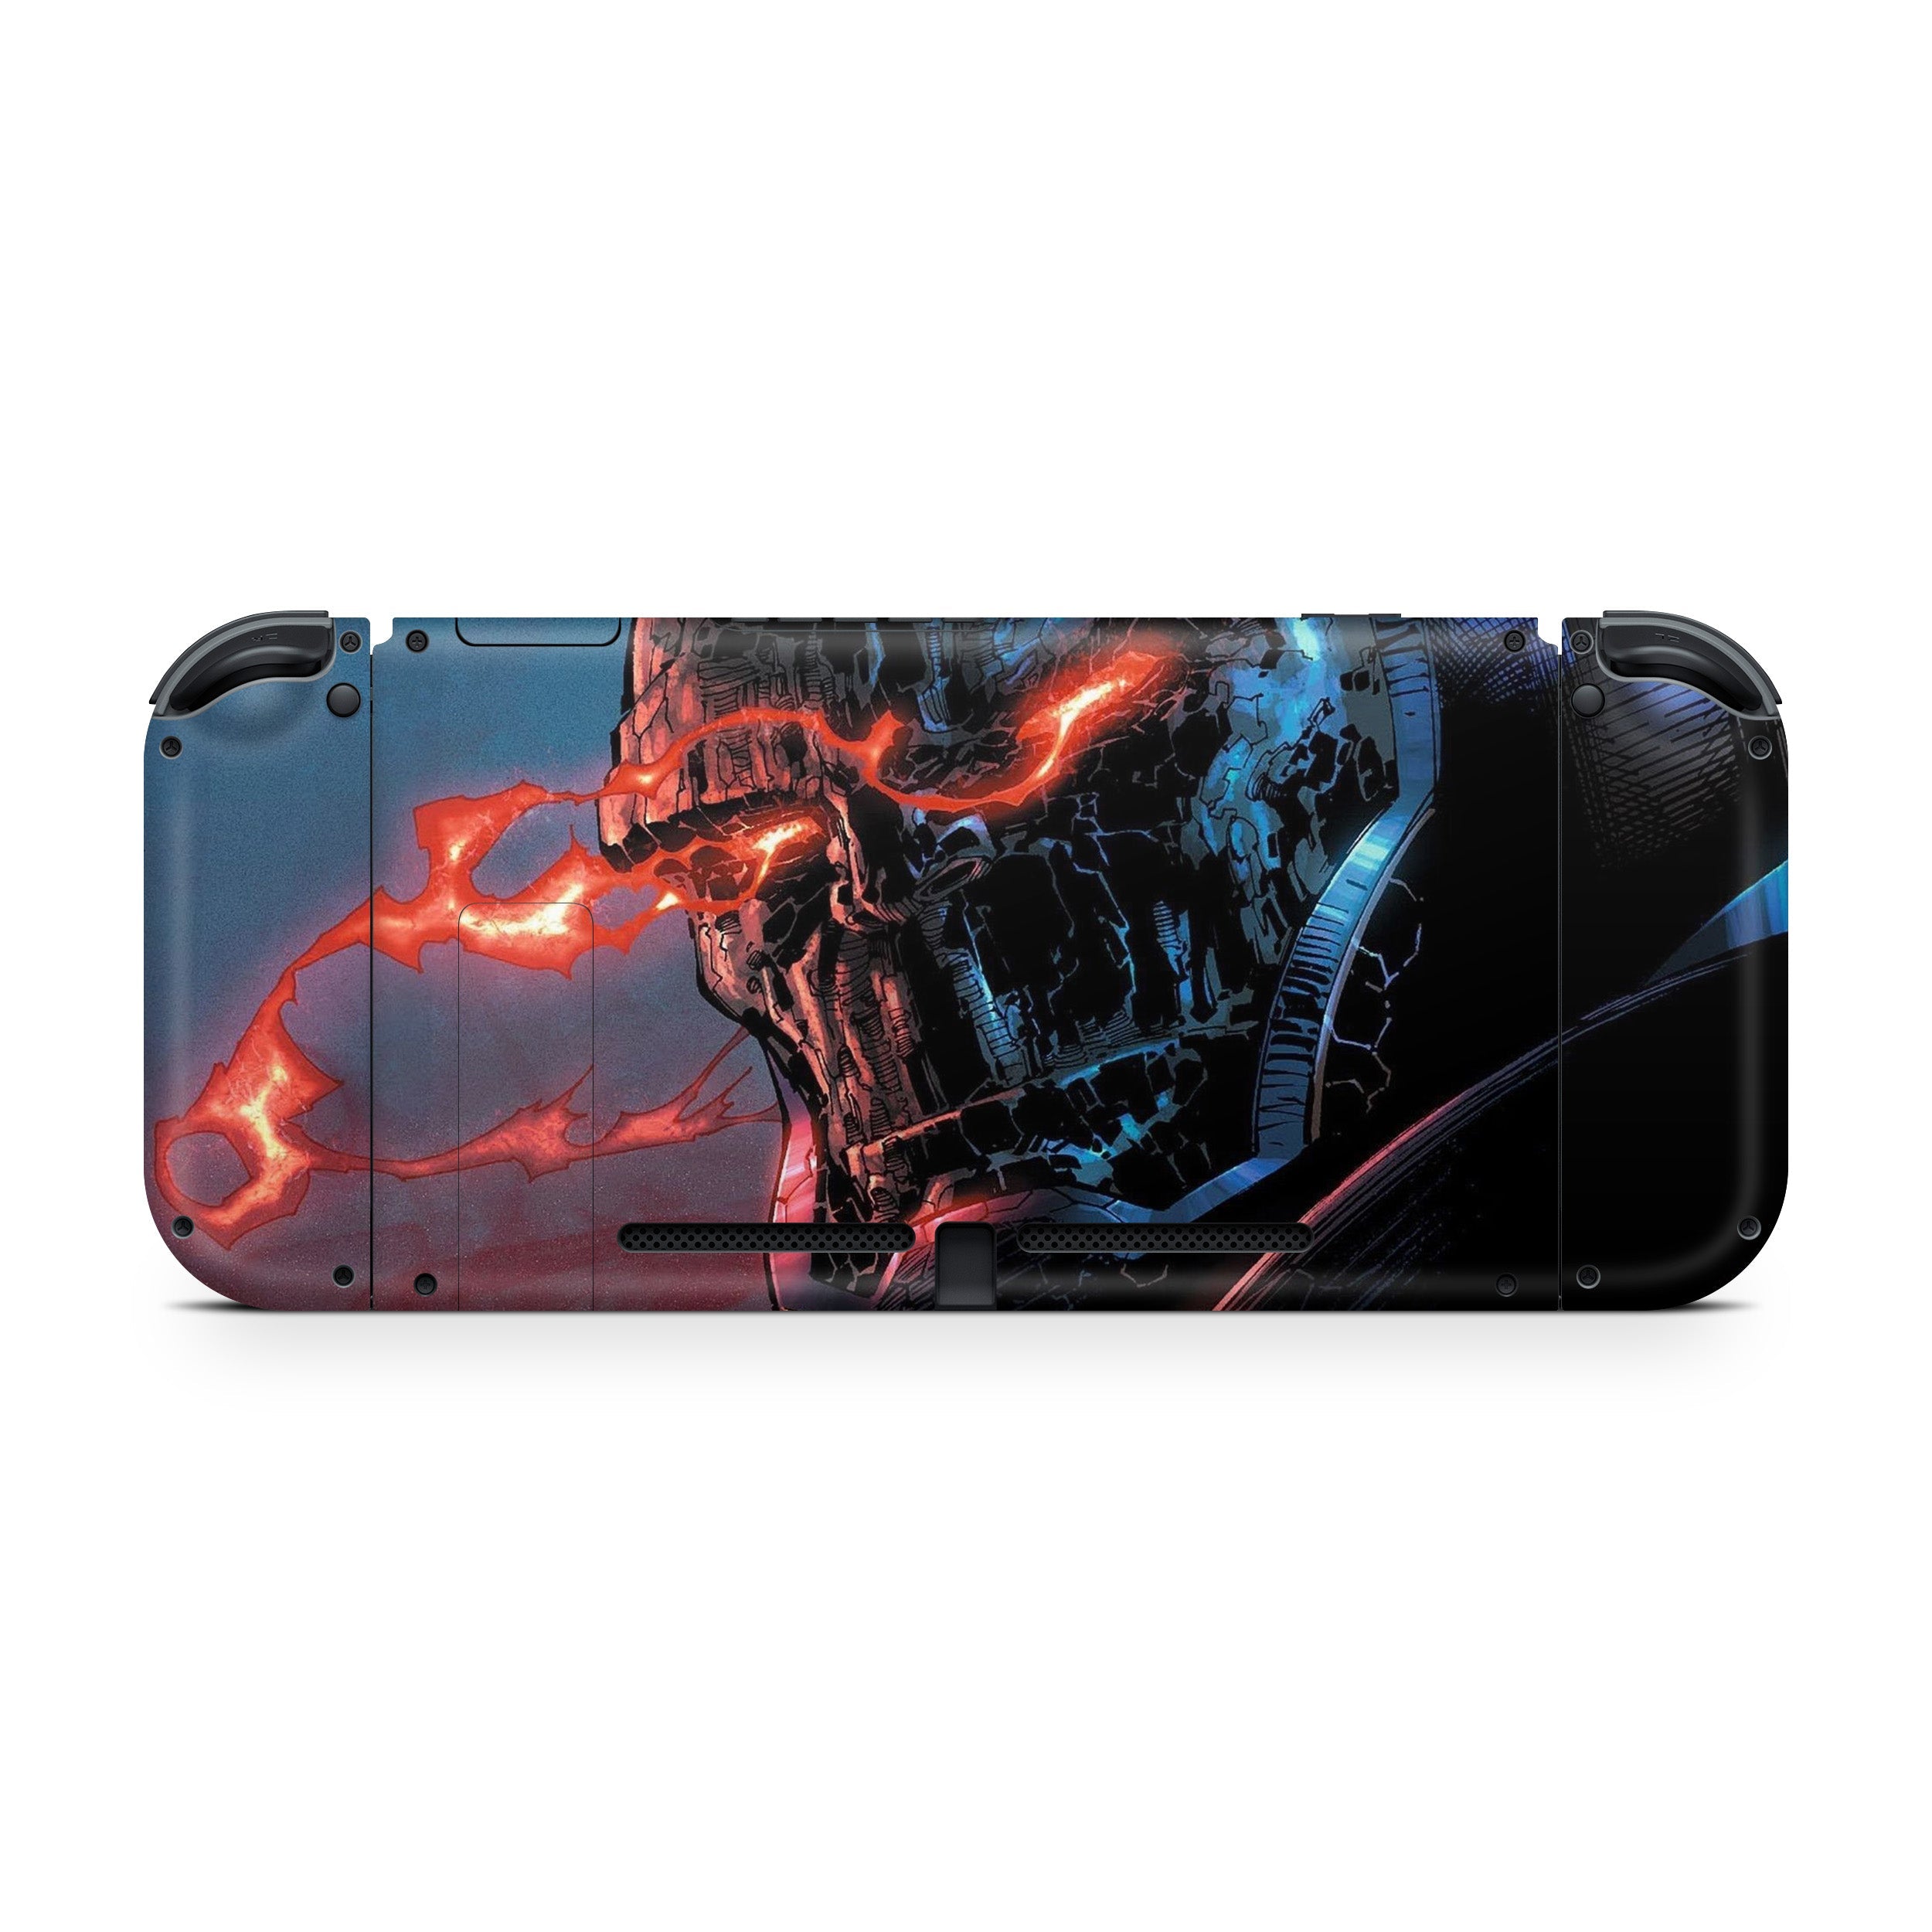 A video game skin featuring a DC Darkseid design for the Nintendo Switch.